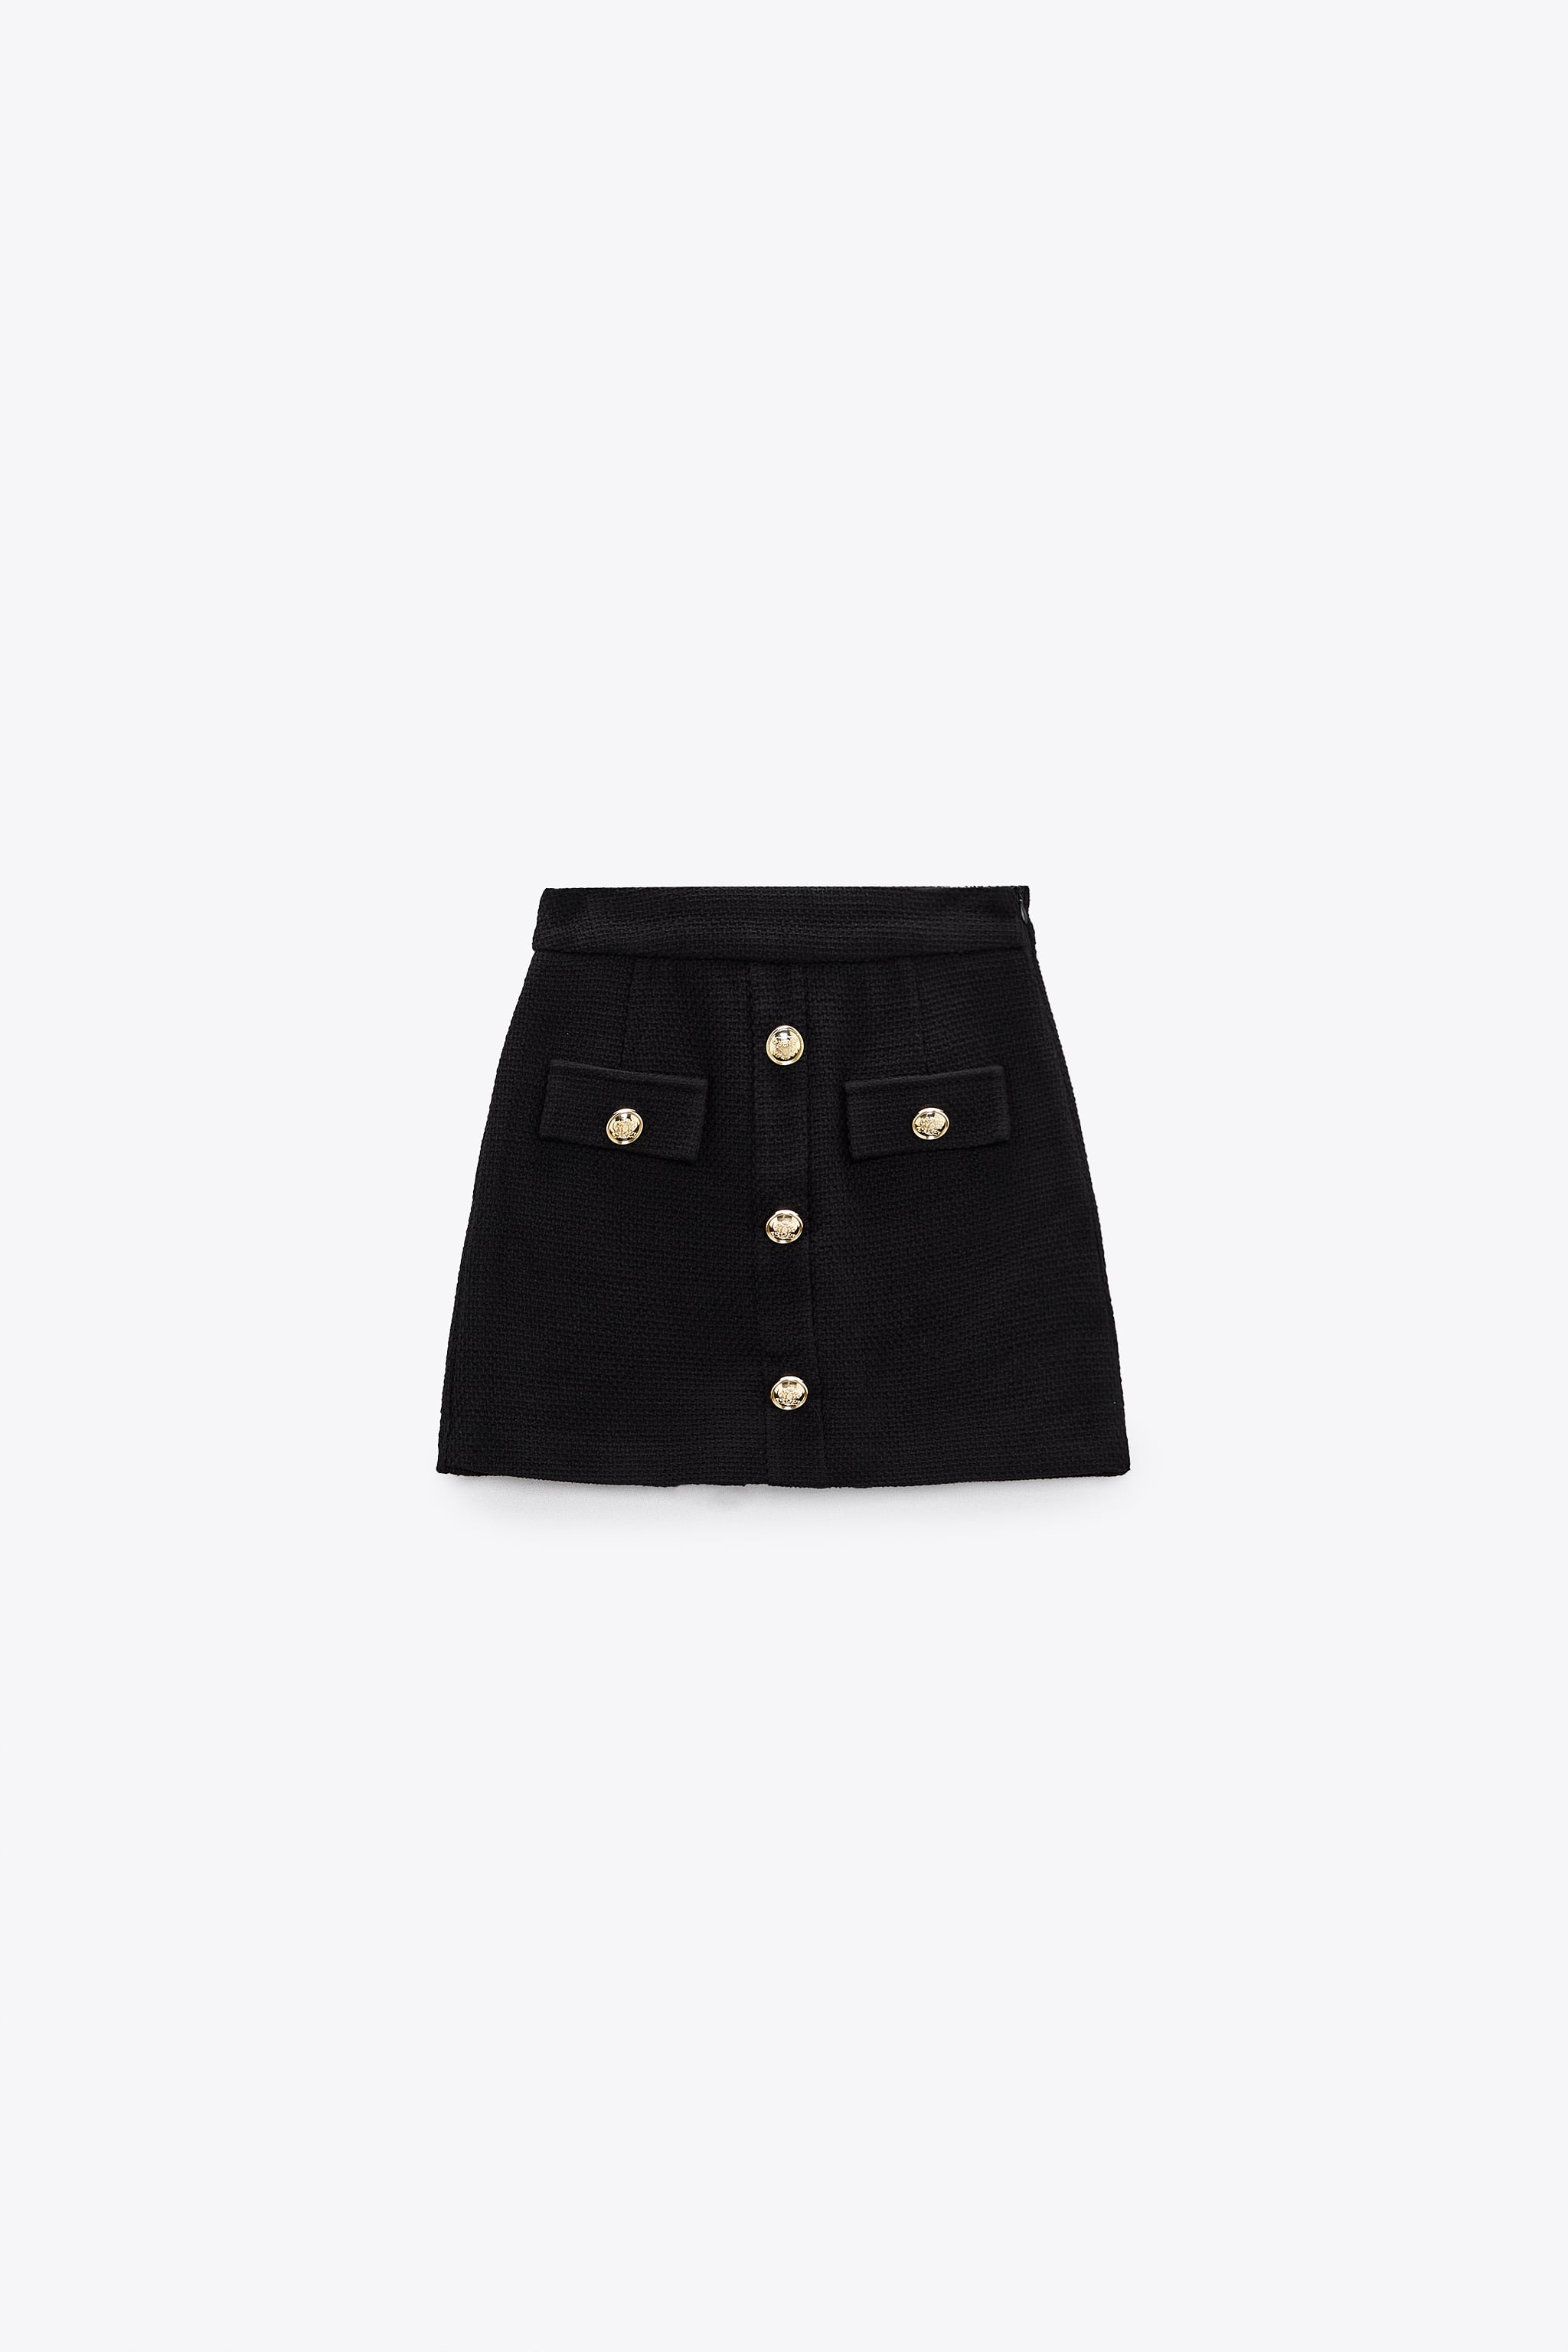 30 Expensive-Looking Zara Finds That Look Designer | Who What Wear